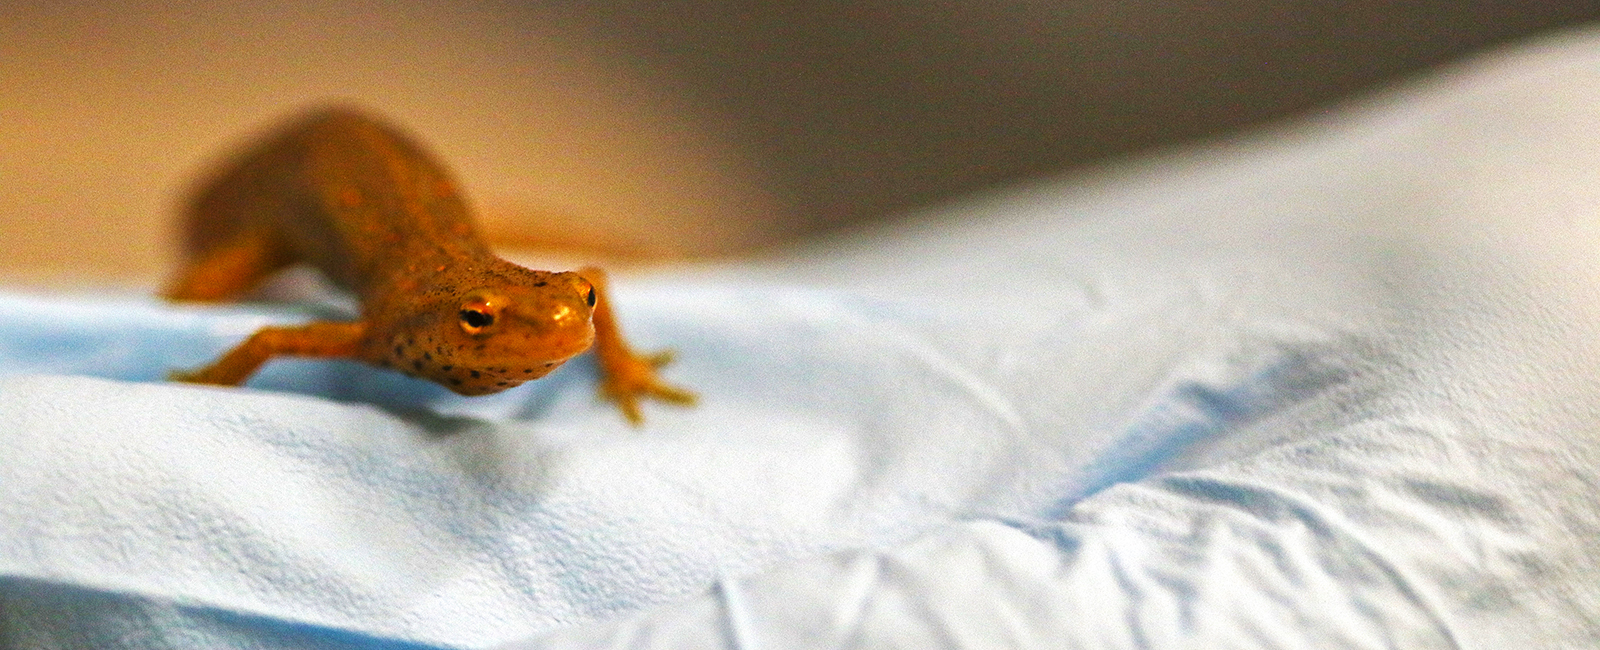 An eastern newt rests on a gloved hand.